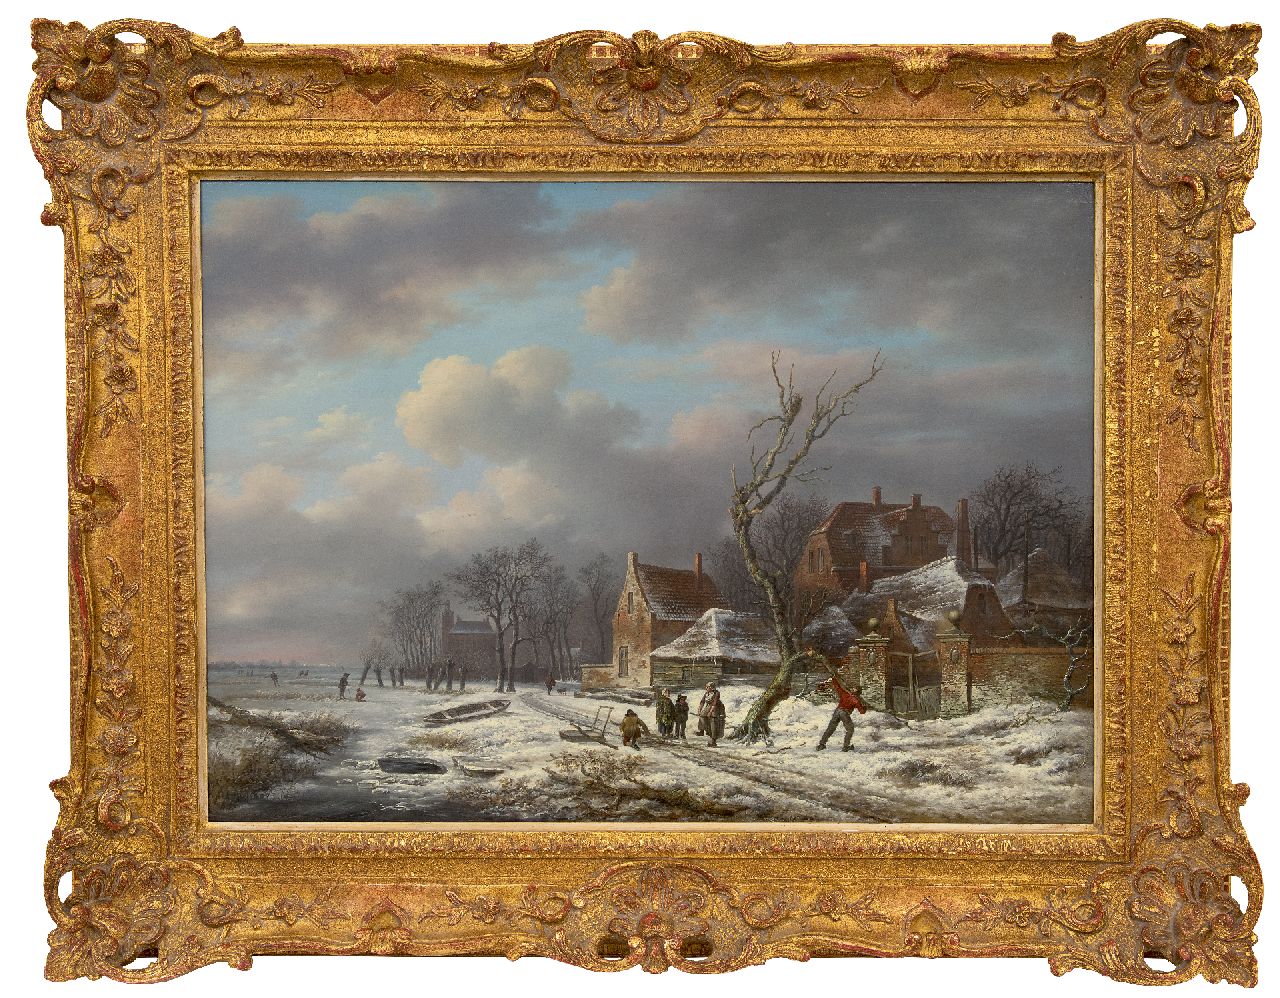 Schelfhout A.  | Andreas Schelfhout | Paintings offered for sale | Gathering wood in winter (pendant of Summer landscape), oil on panel 53.0 x 72.6 cm, signed l.r. (with traces of signature) and painted circa 1815